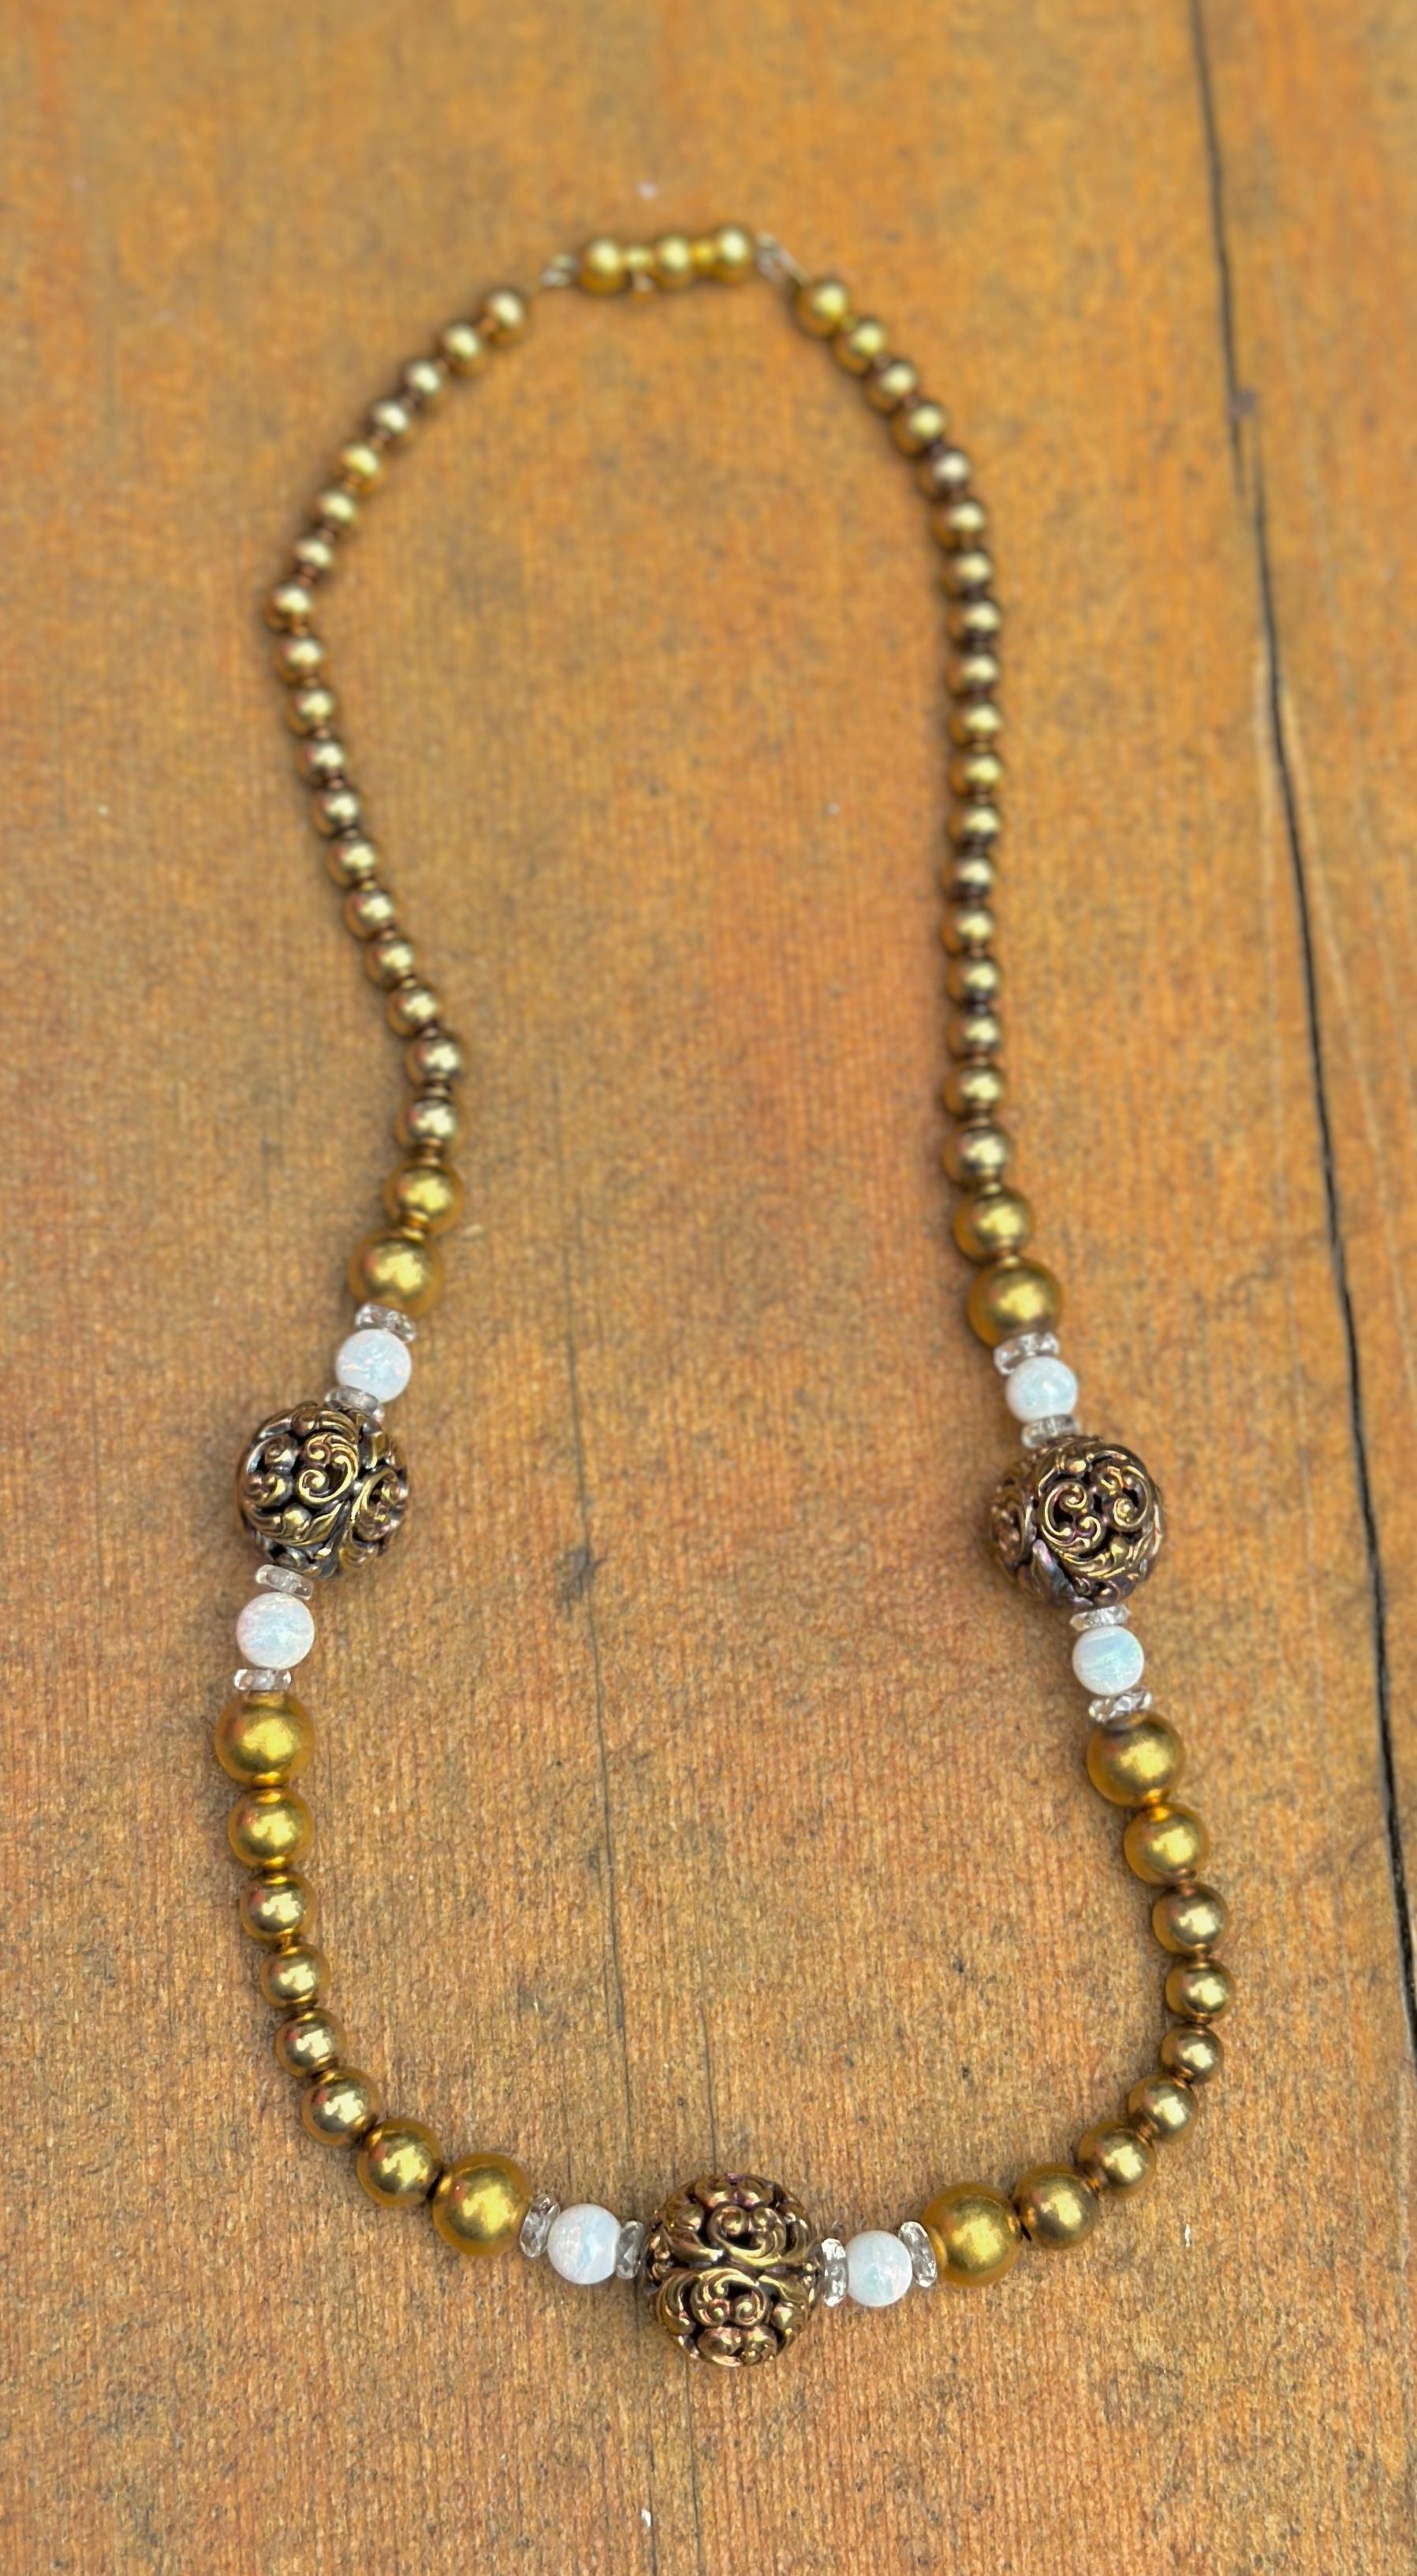 Victorian Opal Rock Crystal Necklace 14 Karat Gold 17 Inch Antique Flower Motif In Excellent Condition For Sale In New York, NY